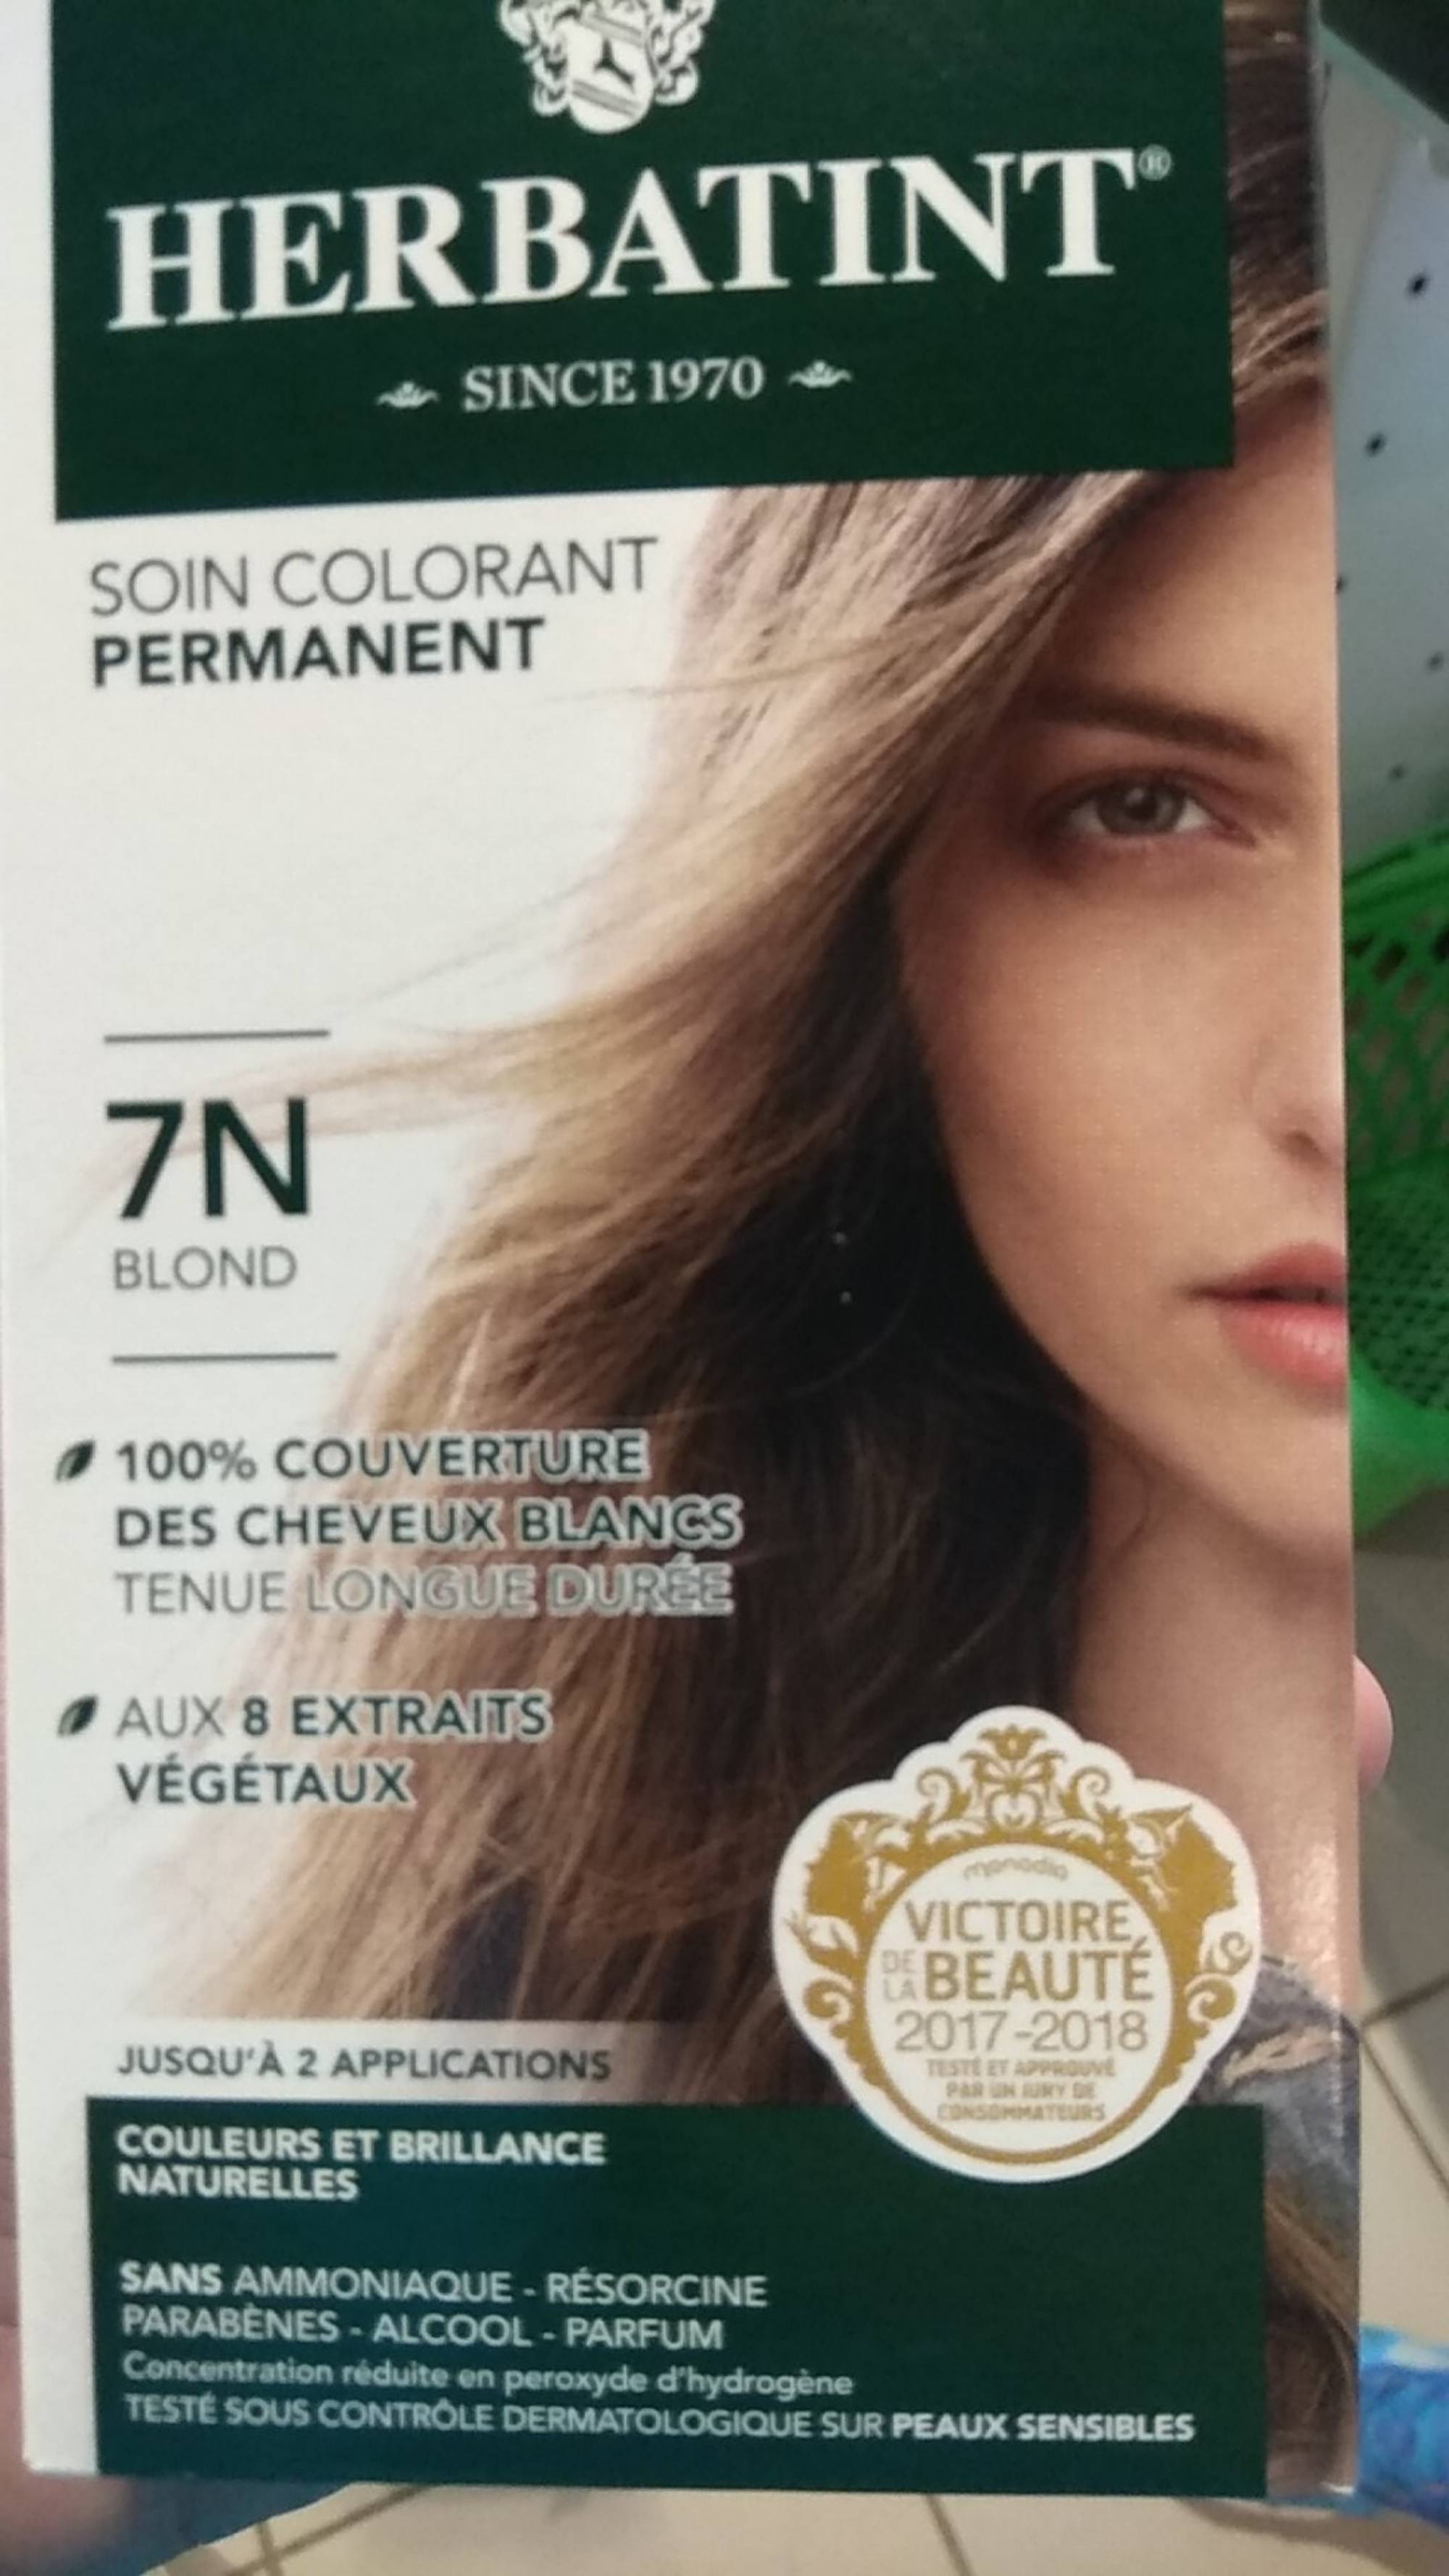 HERBATINT - Soin colorant permanent 7N Blond